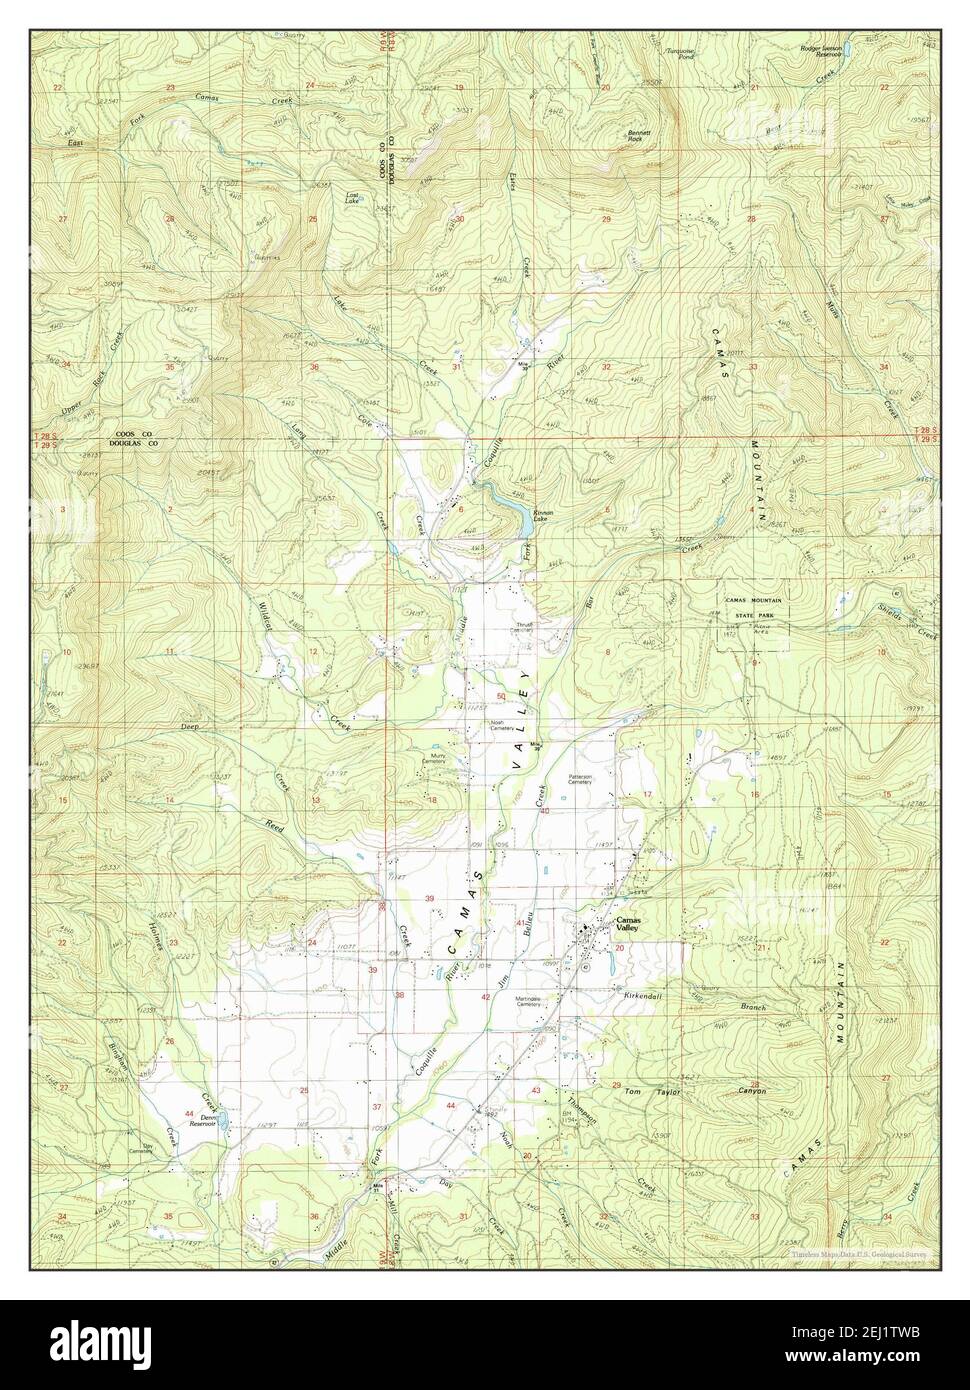 Camas Valley, Oregon, map 1990, 1:24000, United States of America by Timeless Maps, data U.S. Geological Survey Stock Photo